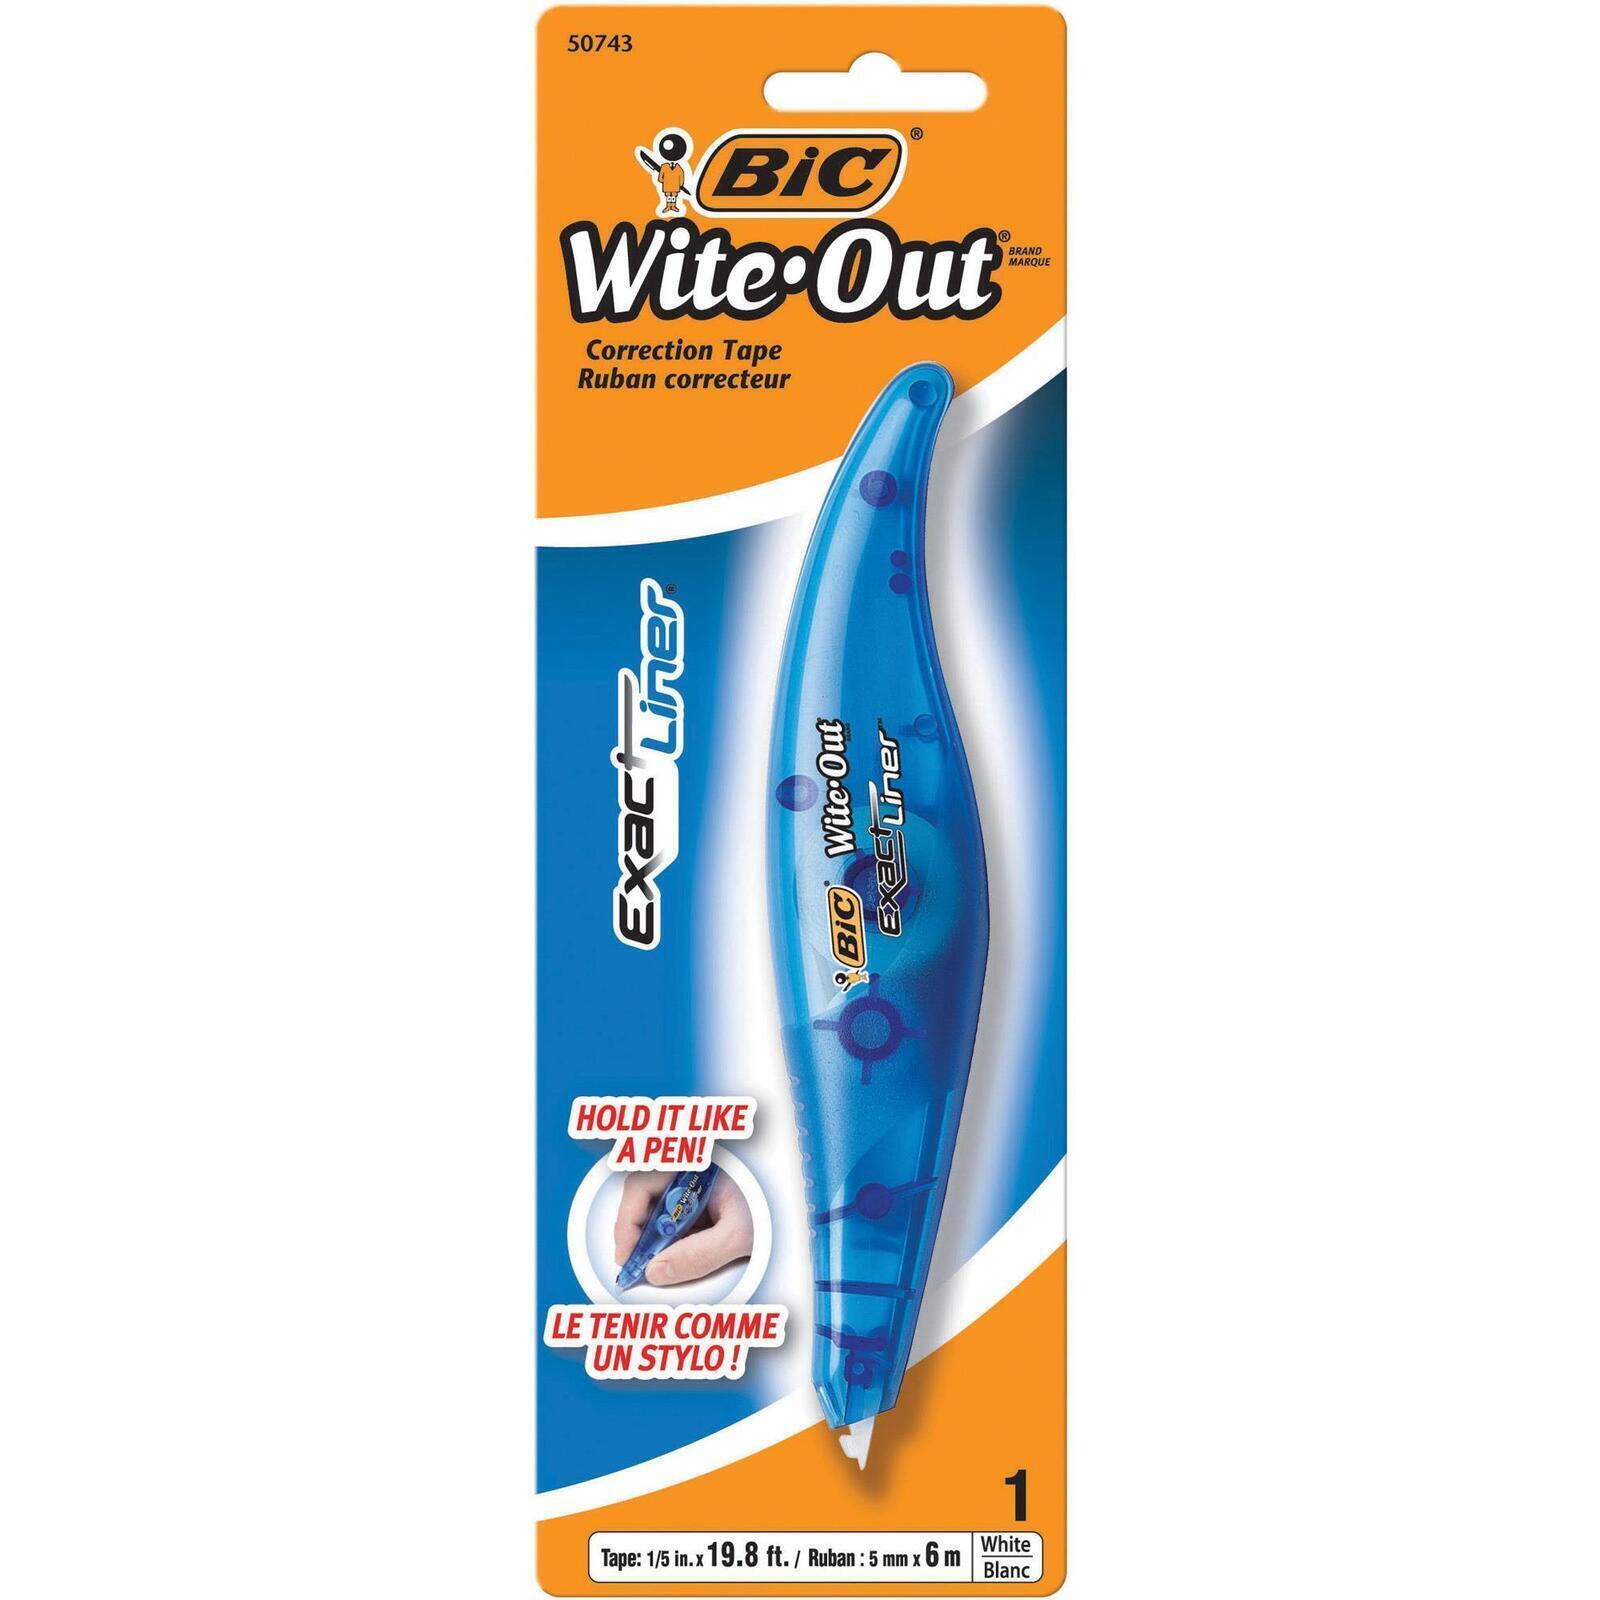 UMKC Health Sciences Bookstore - Bic Wite-Out Shake 'N Squeeze Correction  Pen